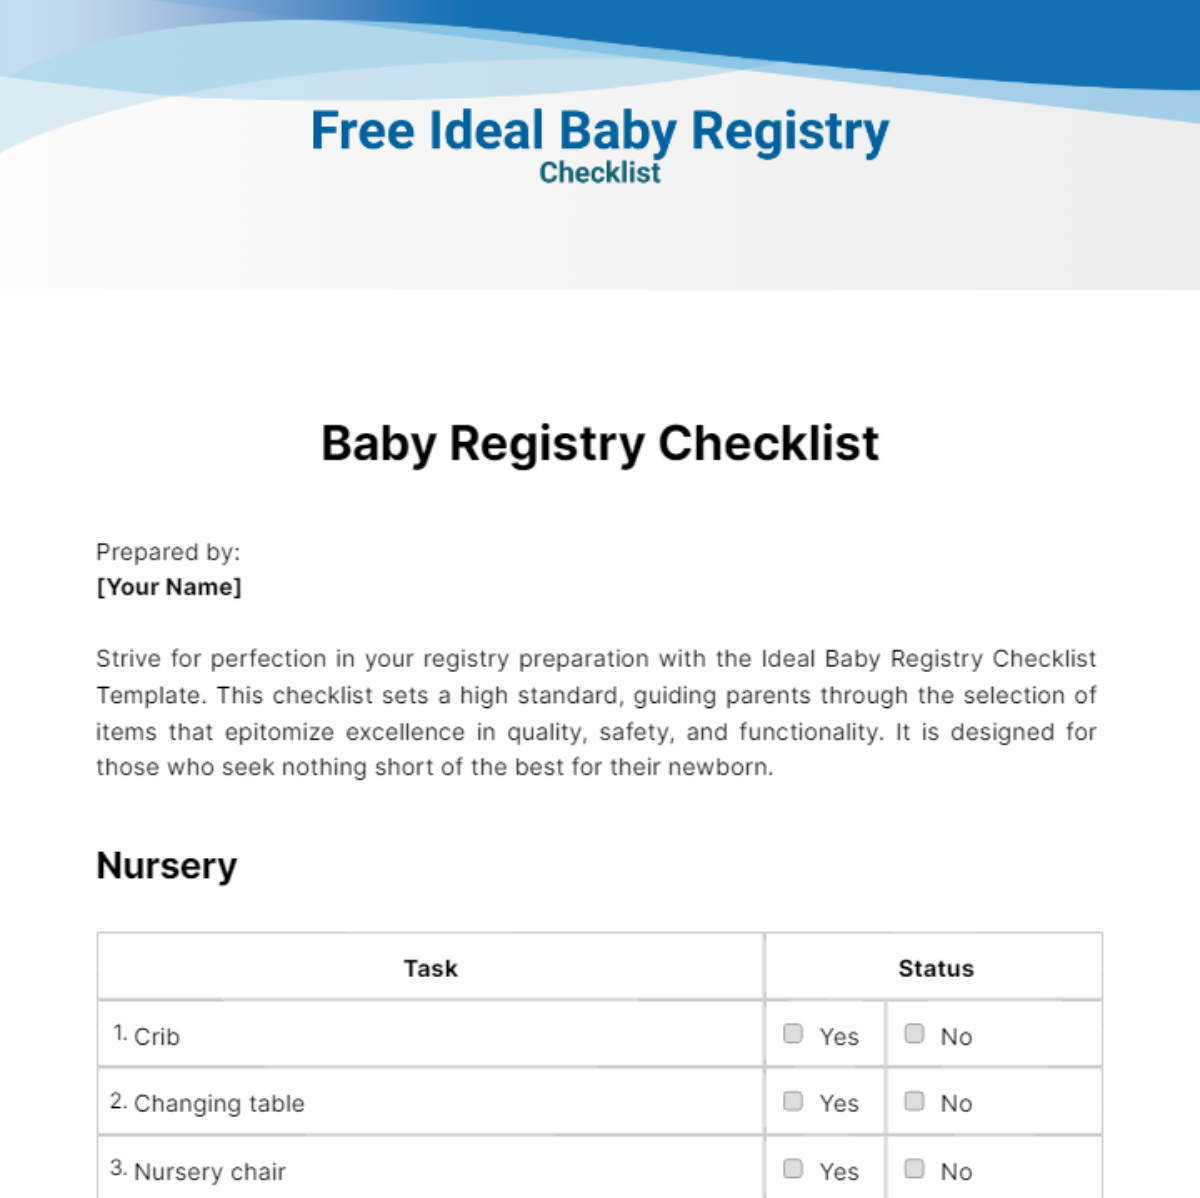 Free Ideal Baby Registry Checklist Template